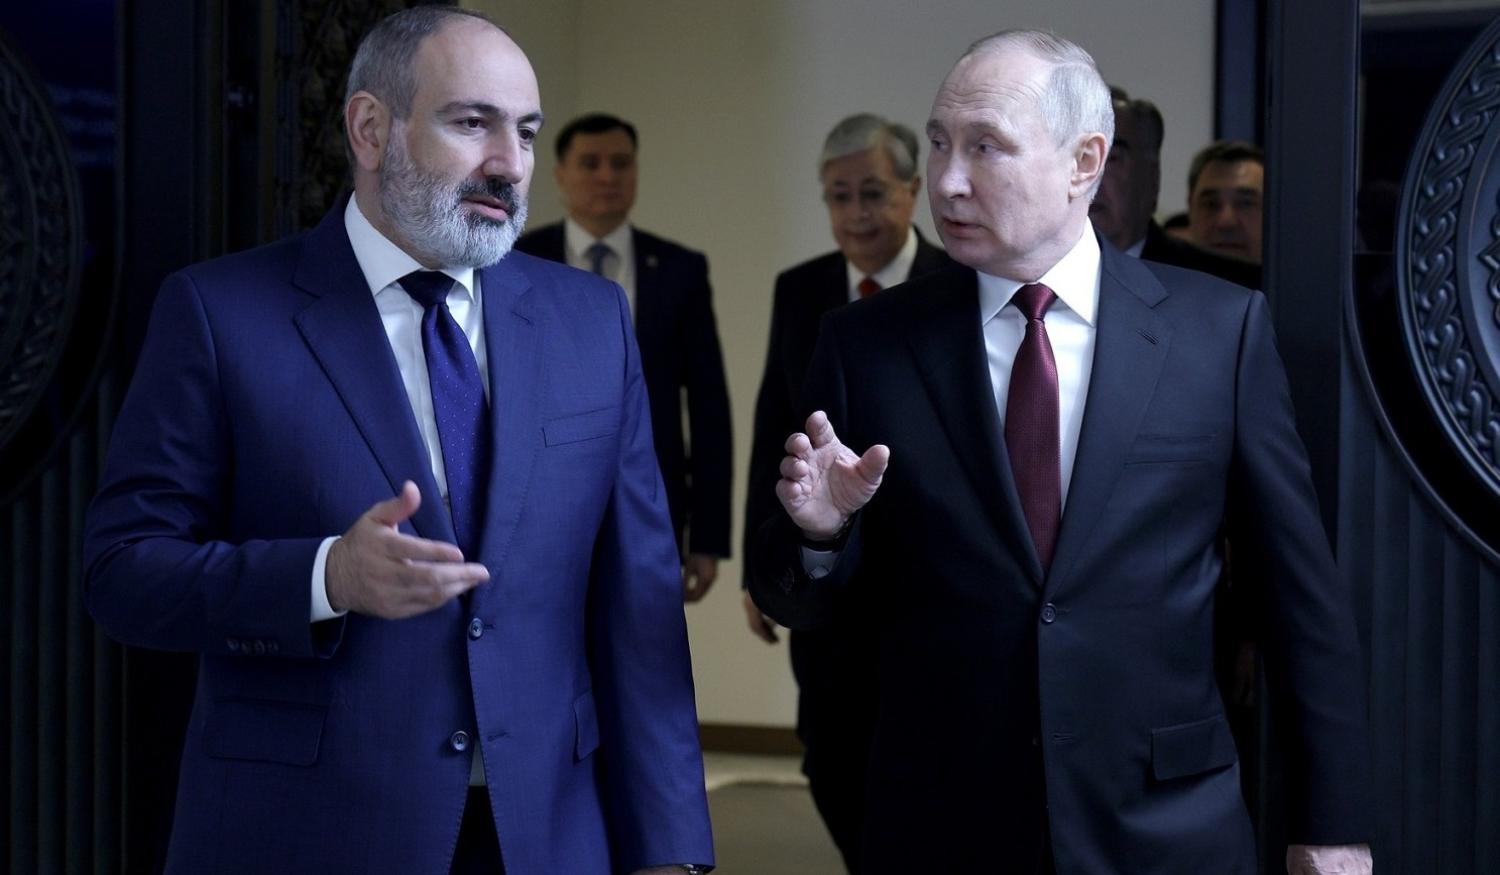 Russian President Vladimir Putin (R) with Prime Minister of the Republic of Armenia Nikol Pashinyan and other regional leaders before a meeting of the Collective Security Council on 23 November 2022 (Vladimir Smirnov/TASS/kremlin.ru)